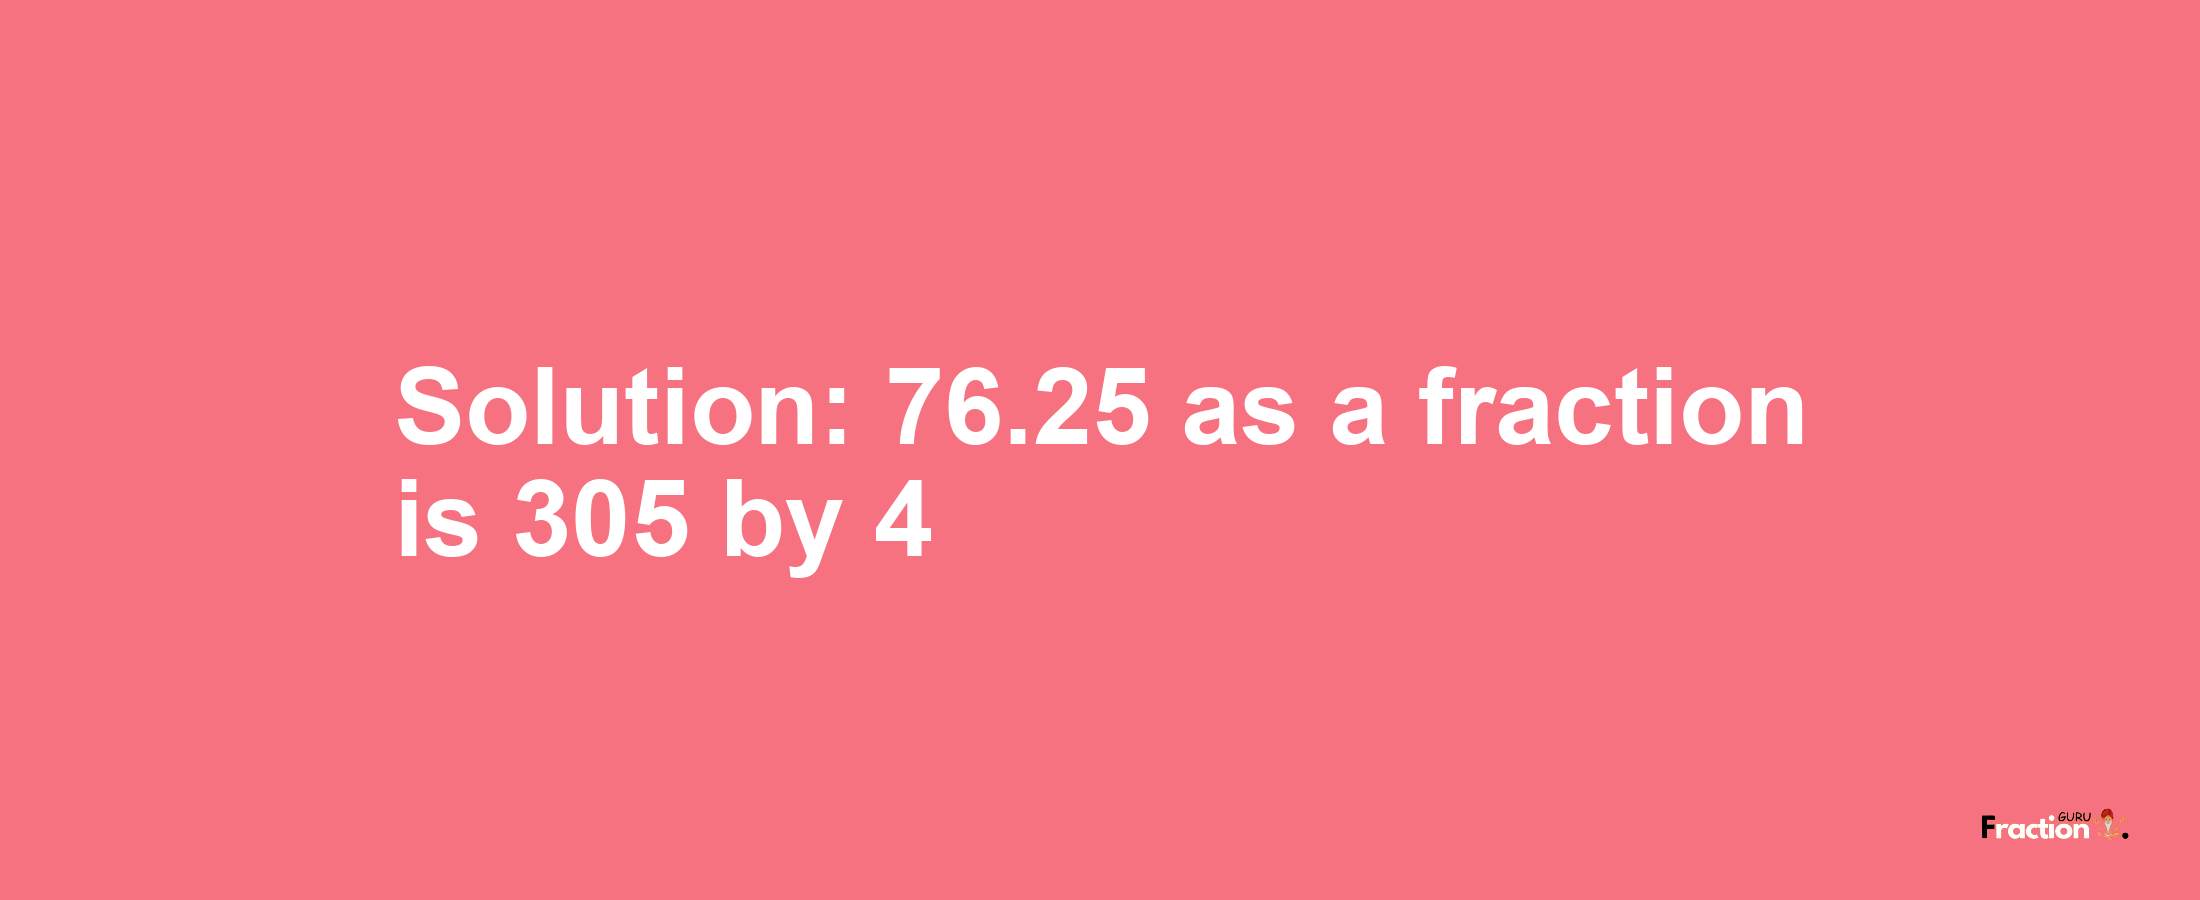 Solution:76.25 as a fraction is 305/4